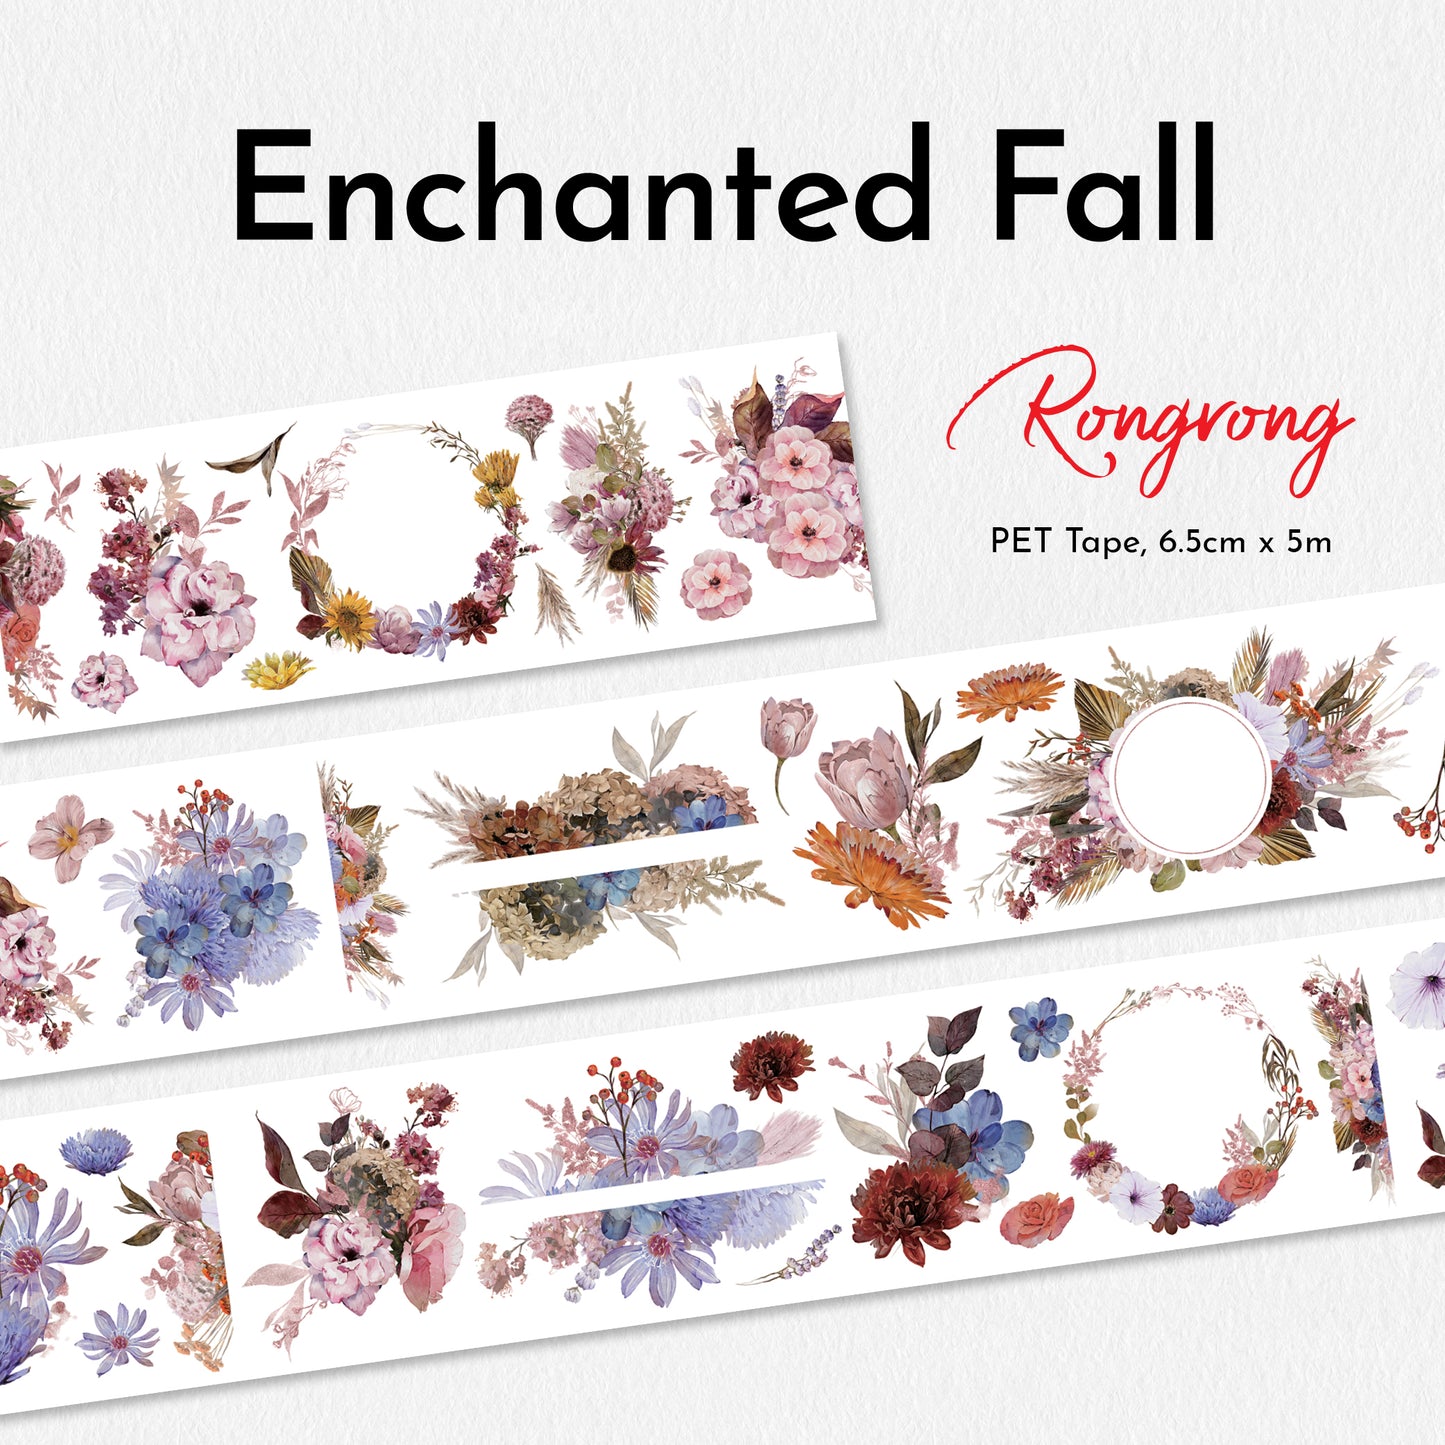 Enchanted Fall PET Tape (updated version 2.0) (Set of 6)